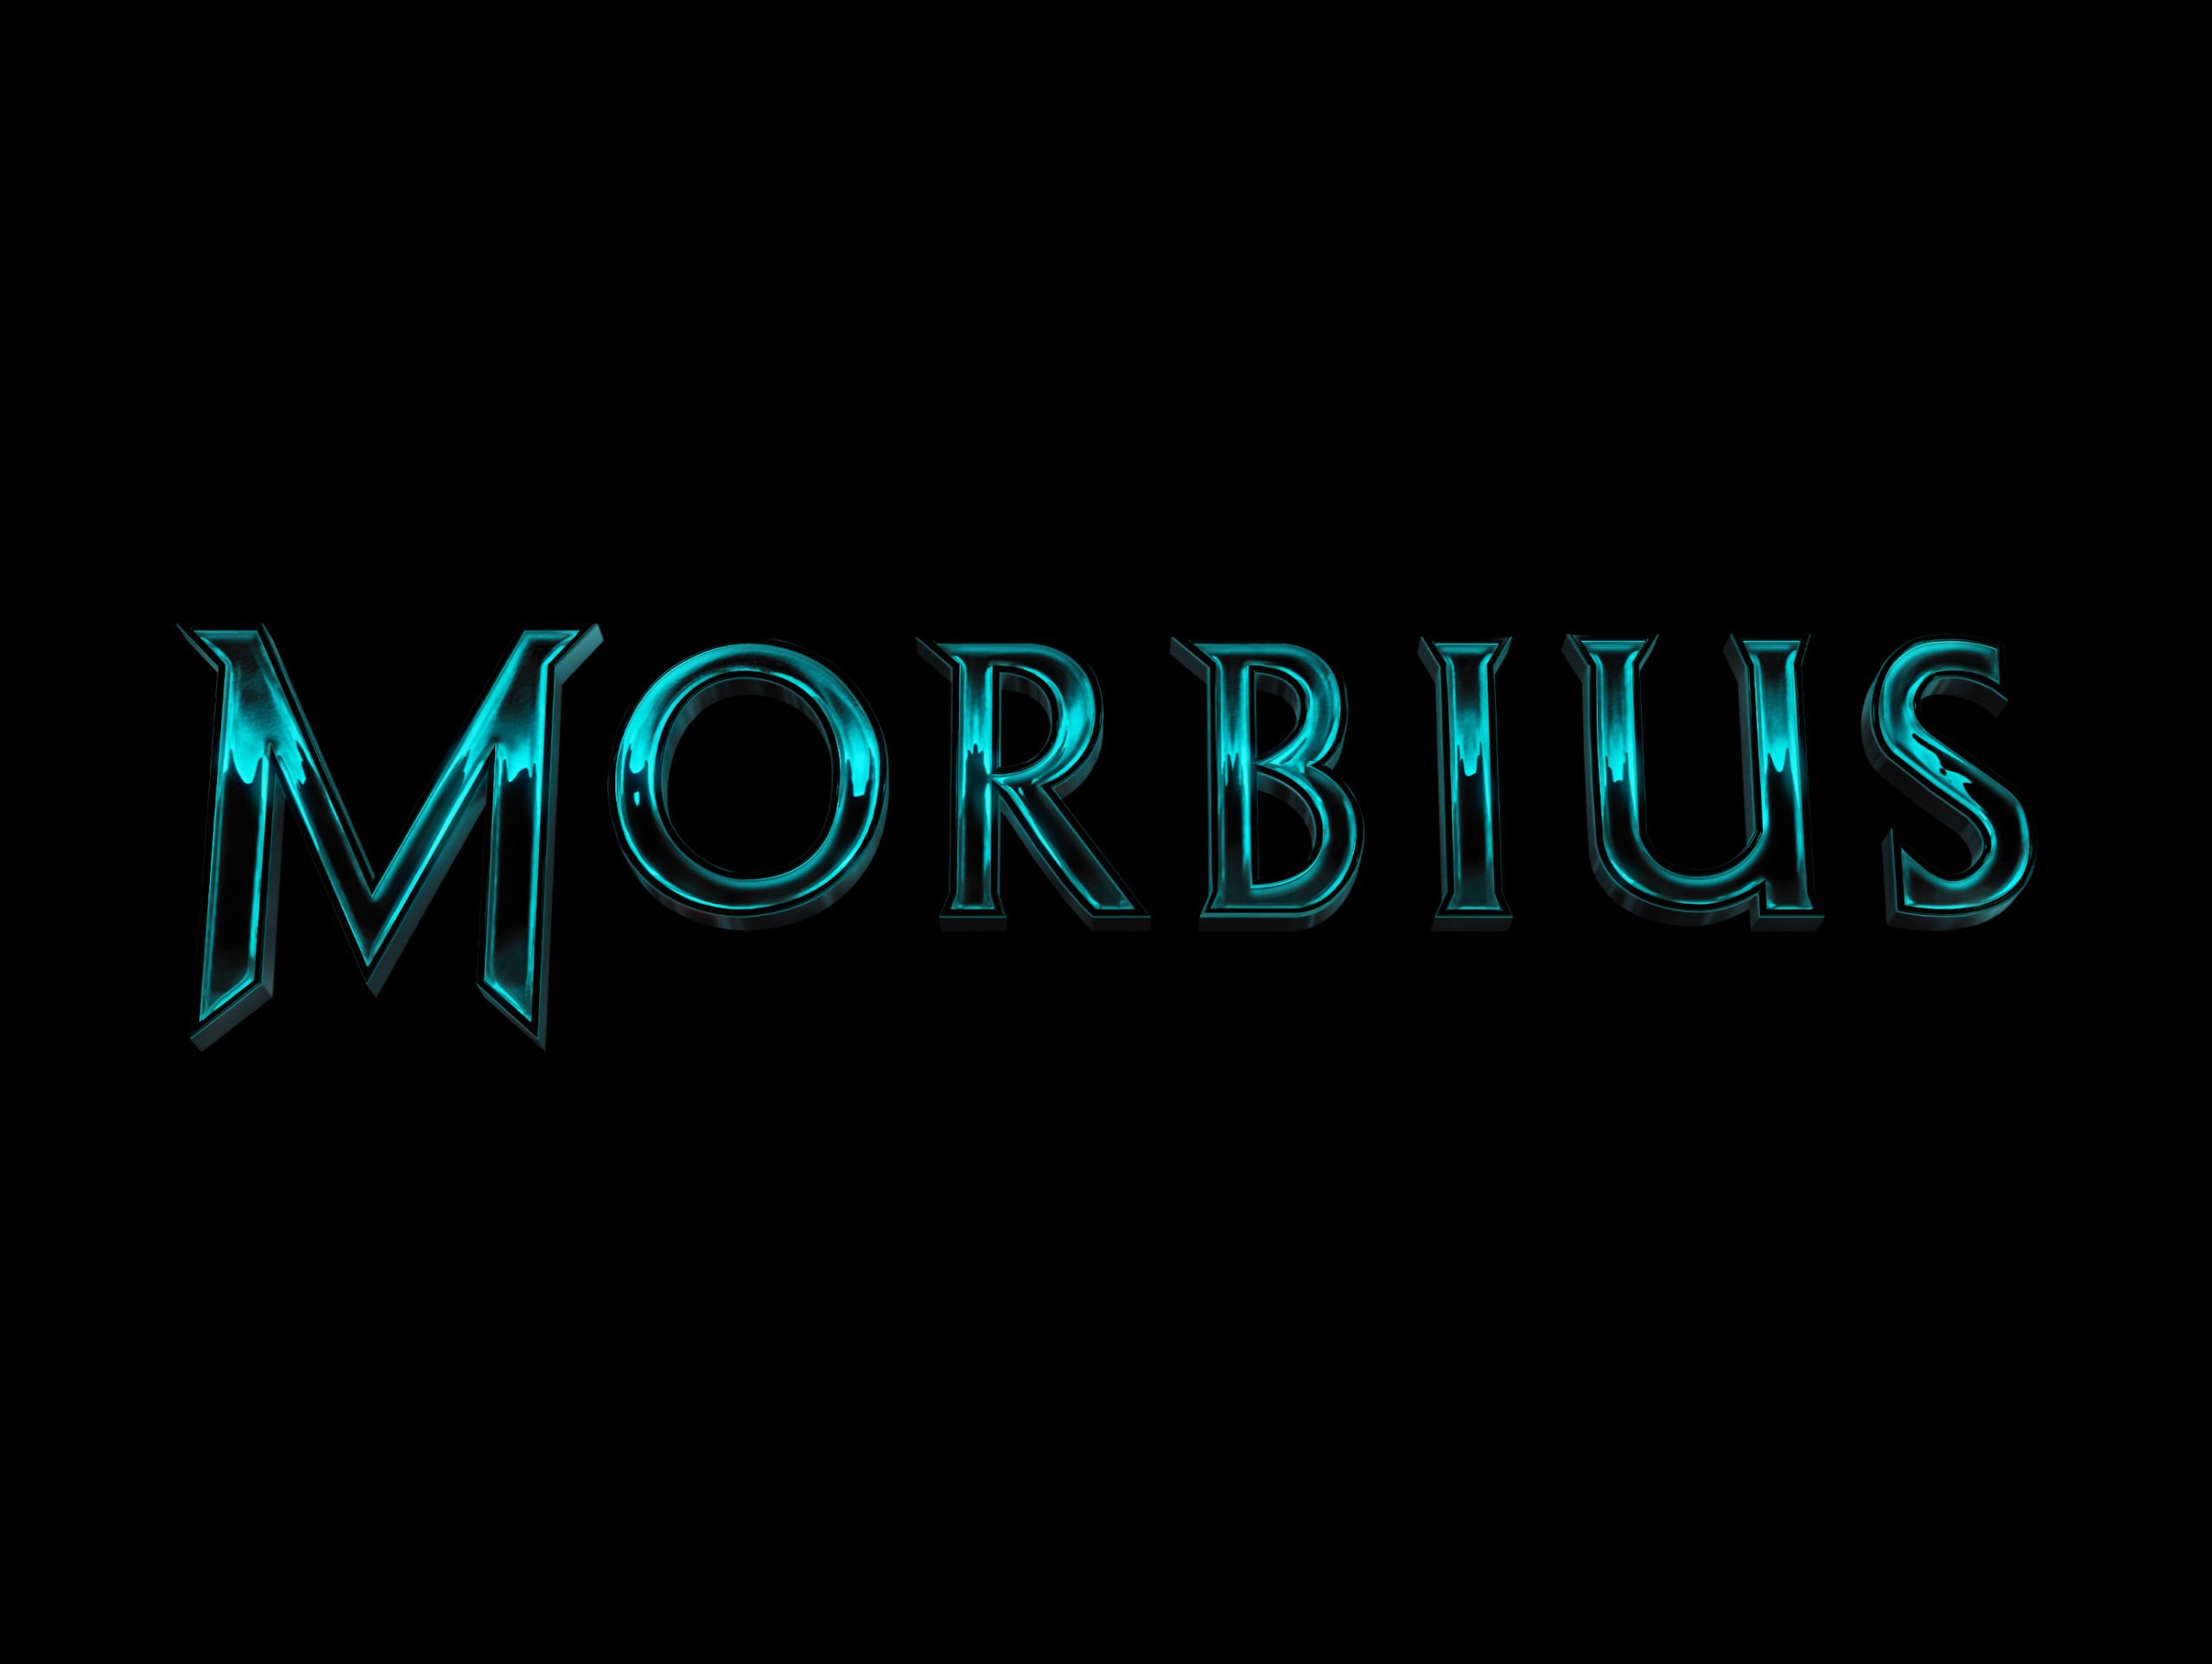 Morbius' sucks: meet the Sony/Marvel vampire flop | The Stanford Daily